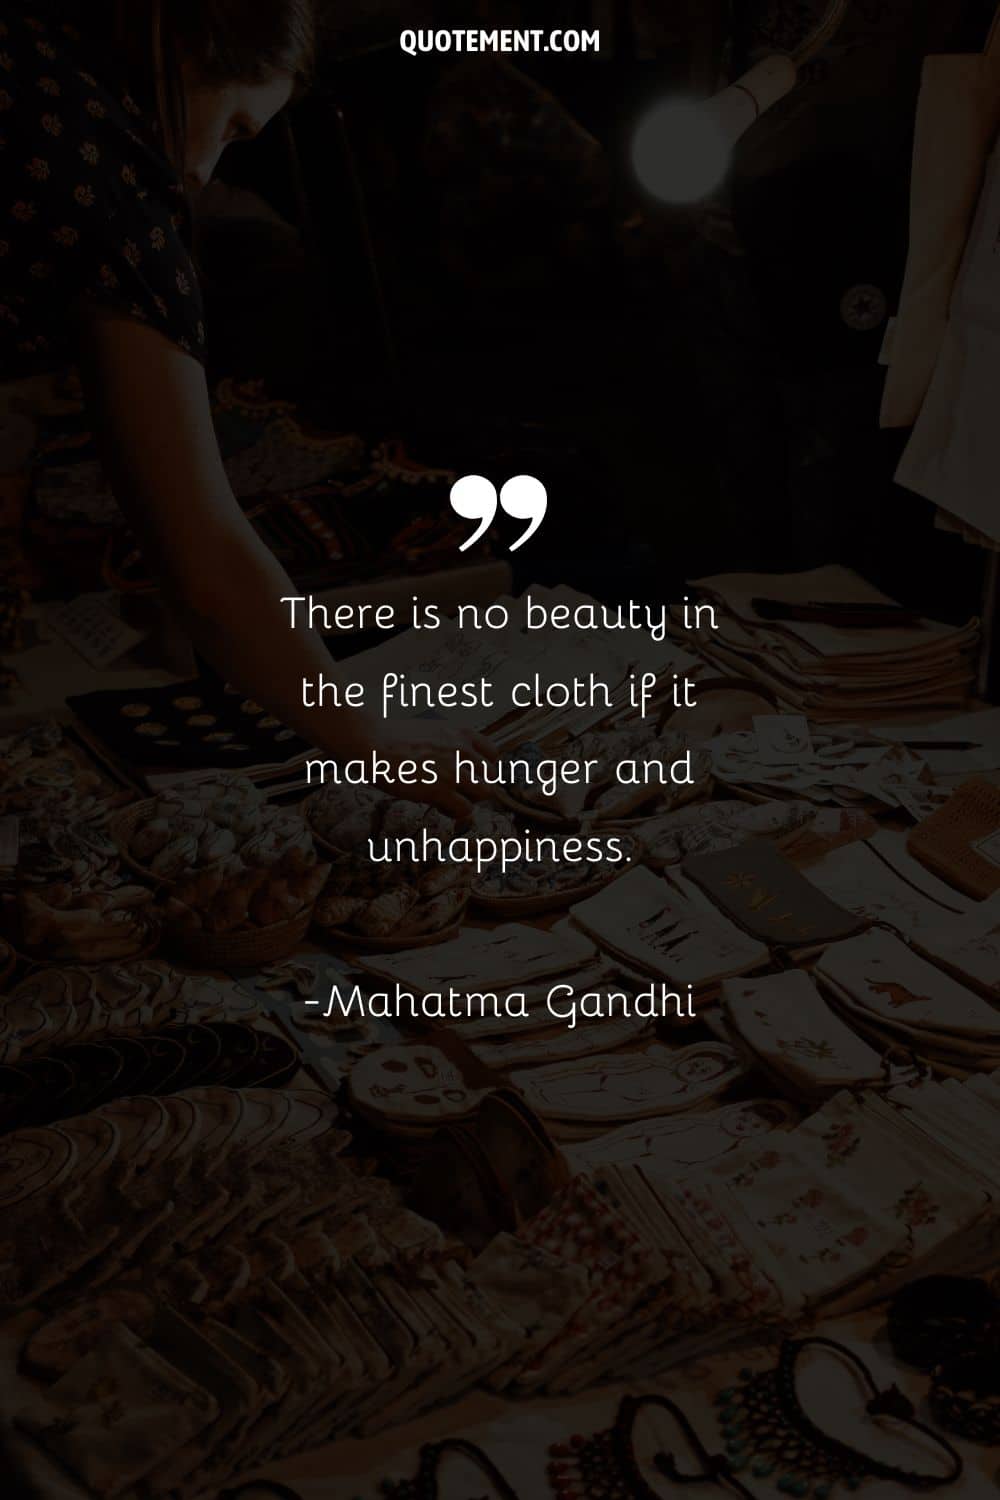 There is no beauty in the finest cloth if it makes hunger and unhappiness